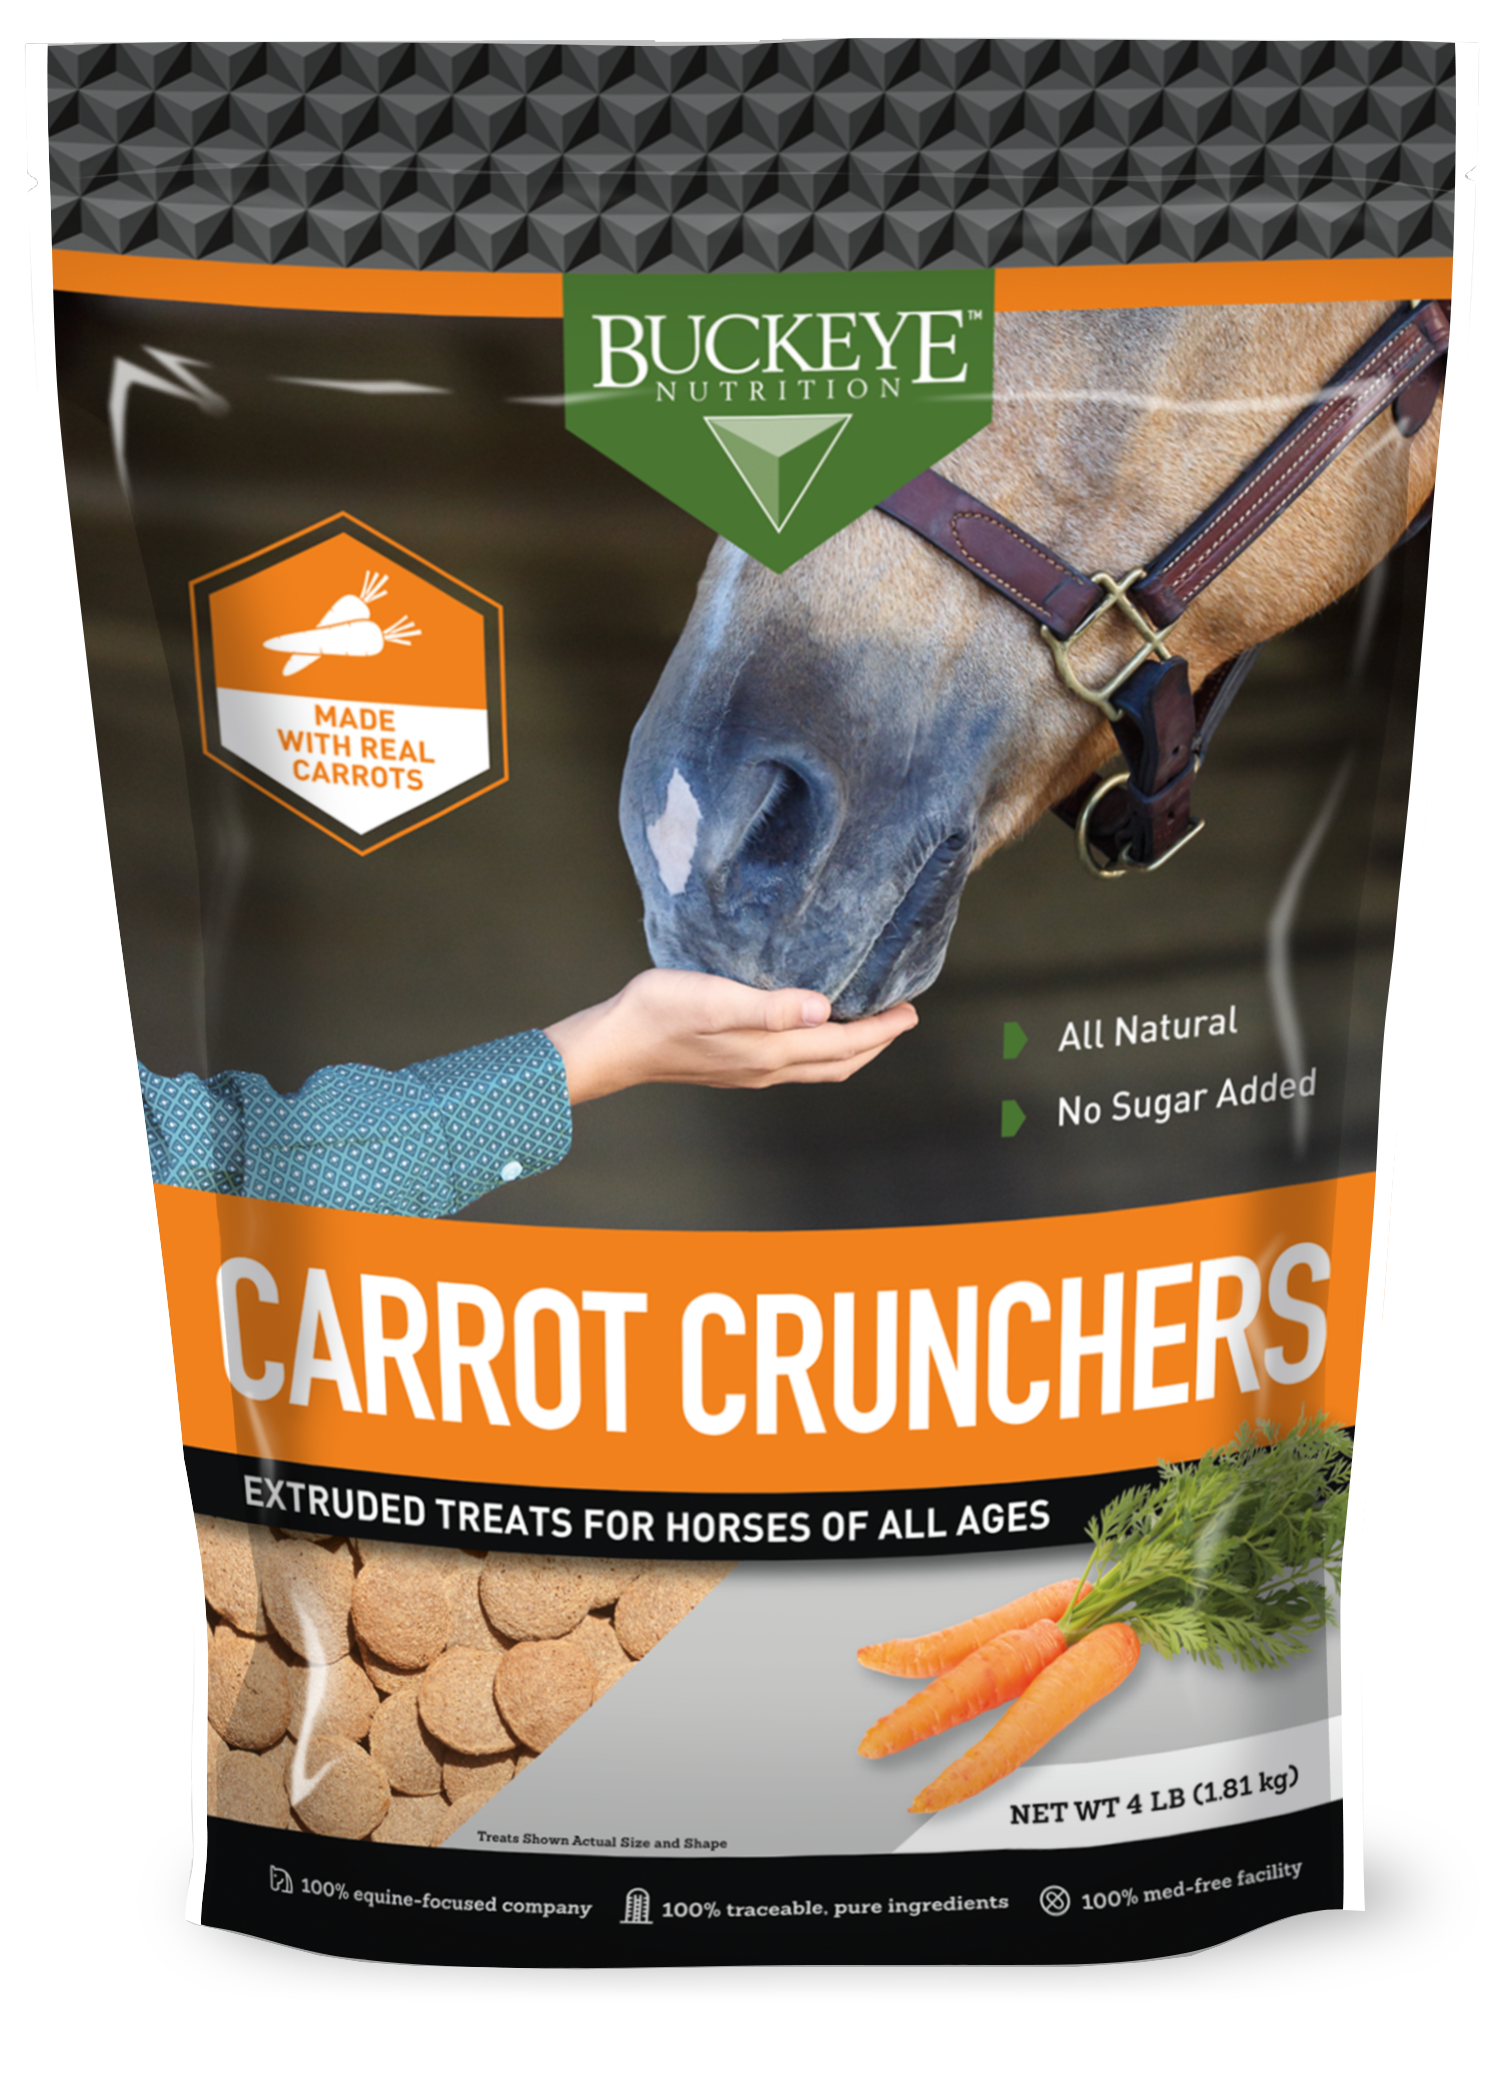 All Natural No Sugar Added Carrot Crunchers Treats package image